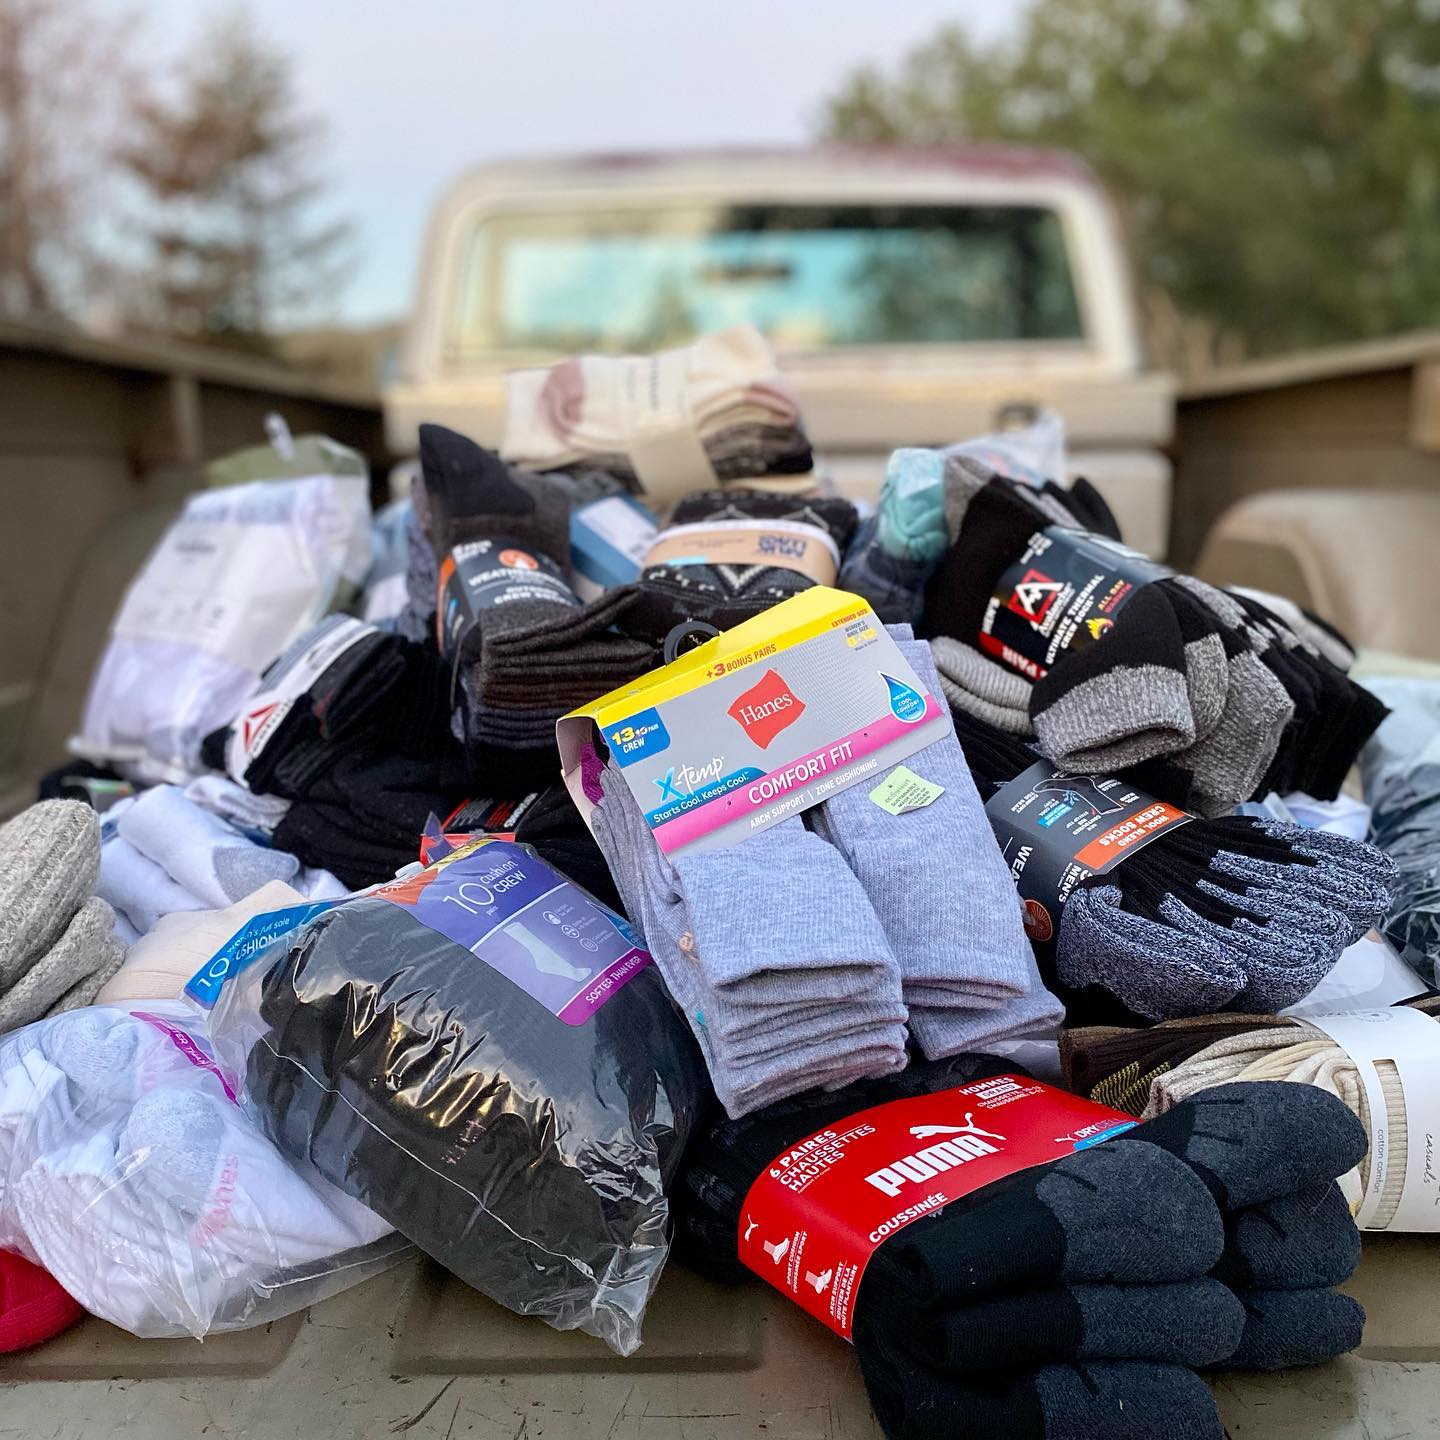 Love the generous hearts of our Fallbrook Vineyard Church family! Thank you @laura.quaid for helping coordinate this collection and thank you @fallbrookfoodpantry for distributing to toes in need 🧦 Deuteronomy 15:7-8“If among you, one of your brothers should become poor, in any of your towns within your land that the Lord your God is giving you, you shall not harden your heart or shut your hand against your poor brother, but you shall open your hand to him and lend him sufficient for his need, whatever it may be.”#toesinneed #fallbrookfoodpantry